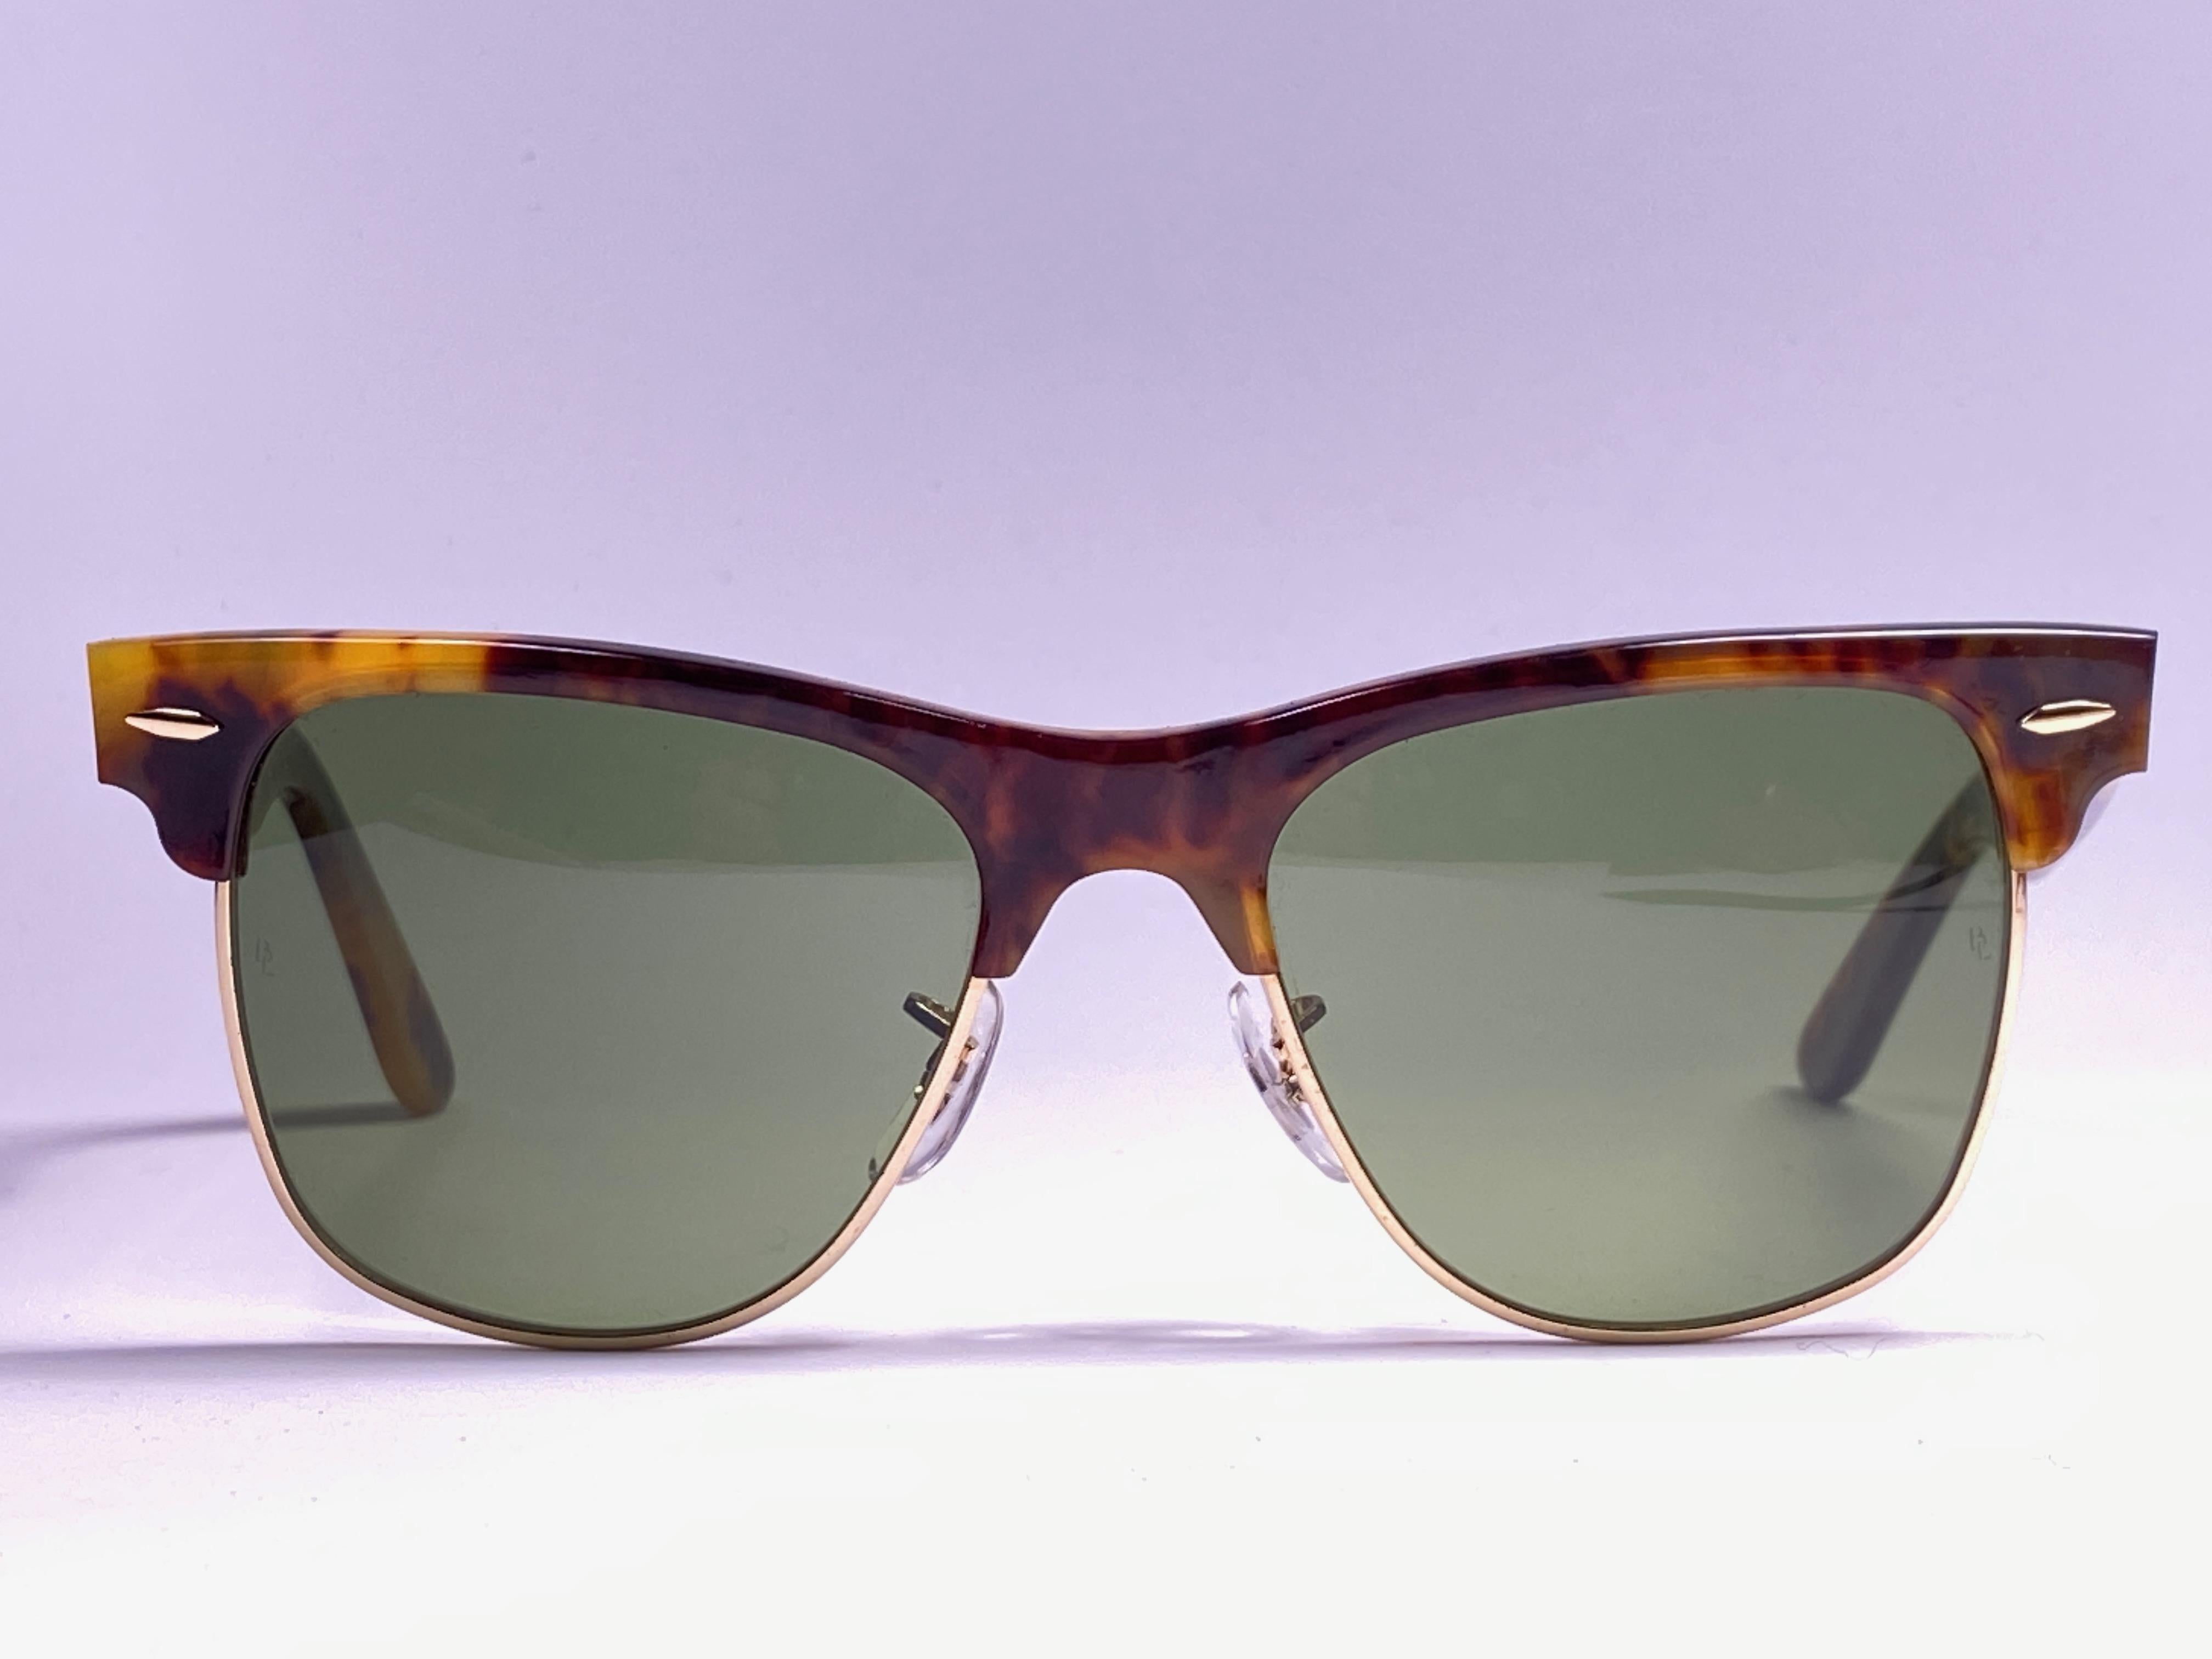 






New classic Wayfarer Max SMALL size tortoise. 
B&L etched in both RB3 green lenses. 
Please notice that this item is nearly 40 years old and show some storage wear.

Made in USA.

Front 13.5 cms
Lens Heigh 4
Lens Width 4.8
Temples 14 cms